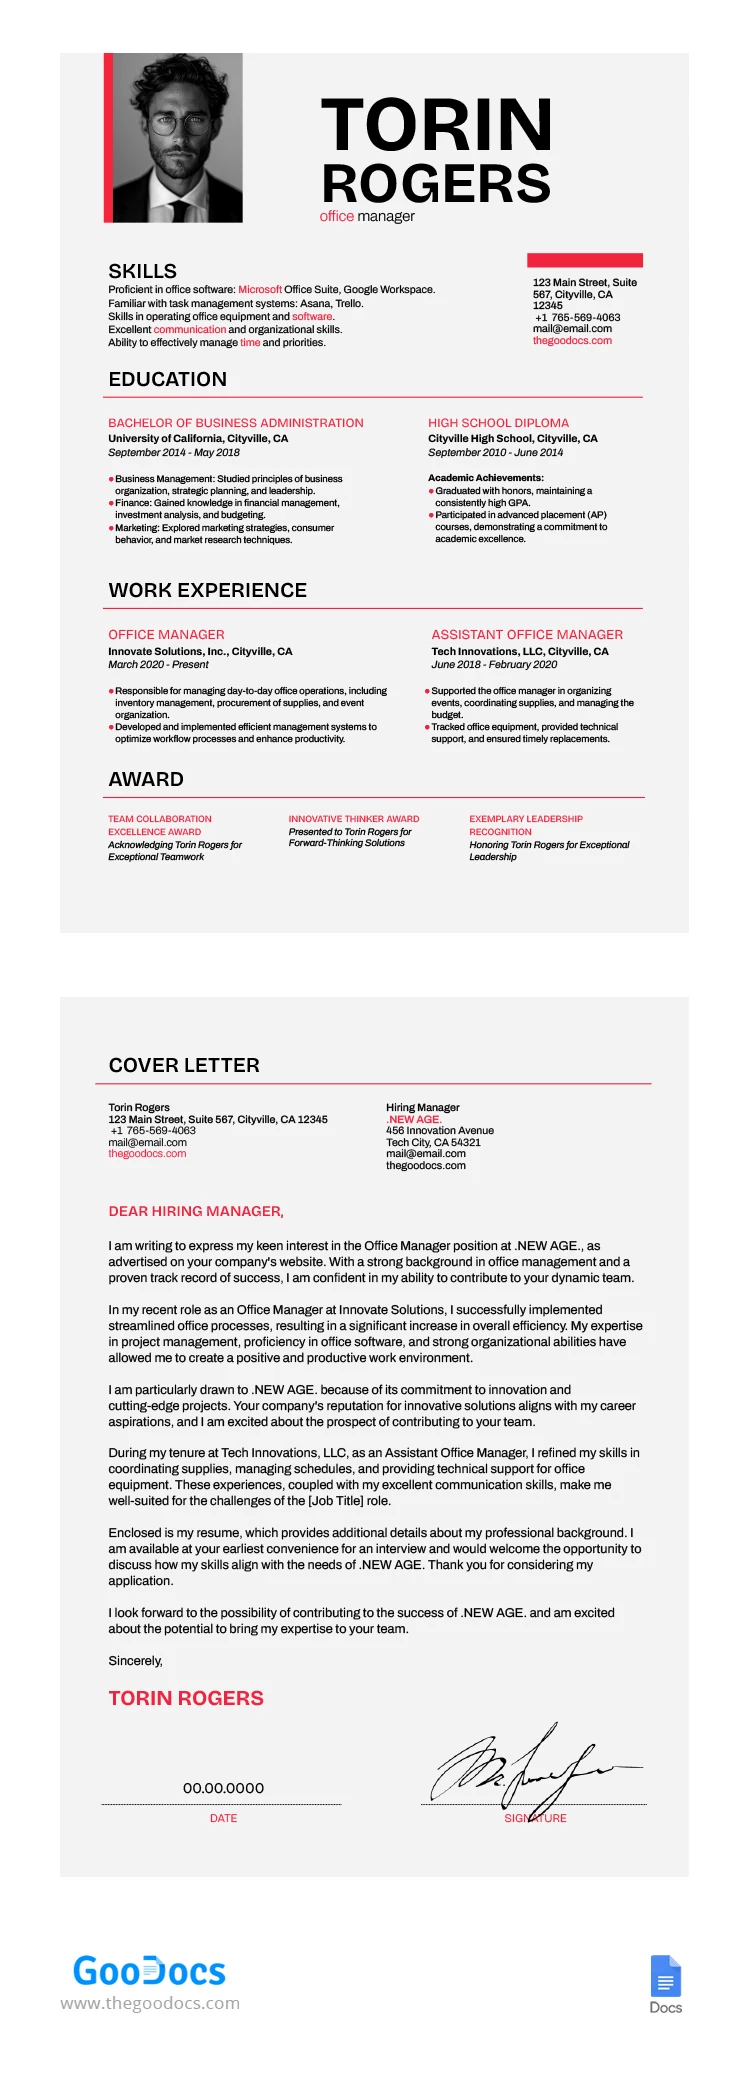 Professional Resume Cover Letter - free Google Docs Template - 10067950